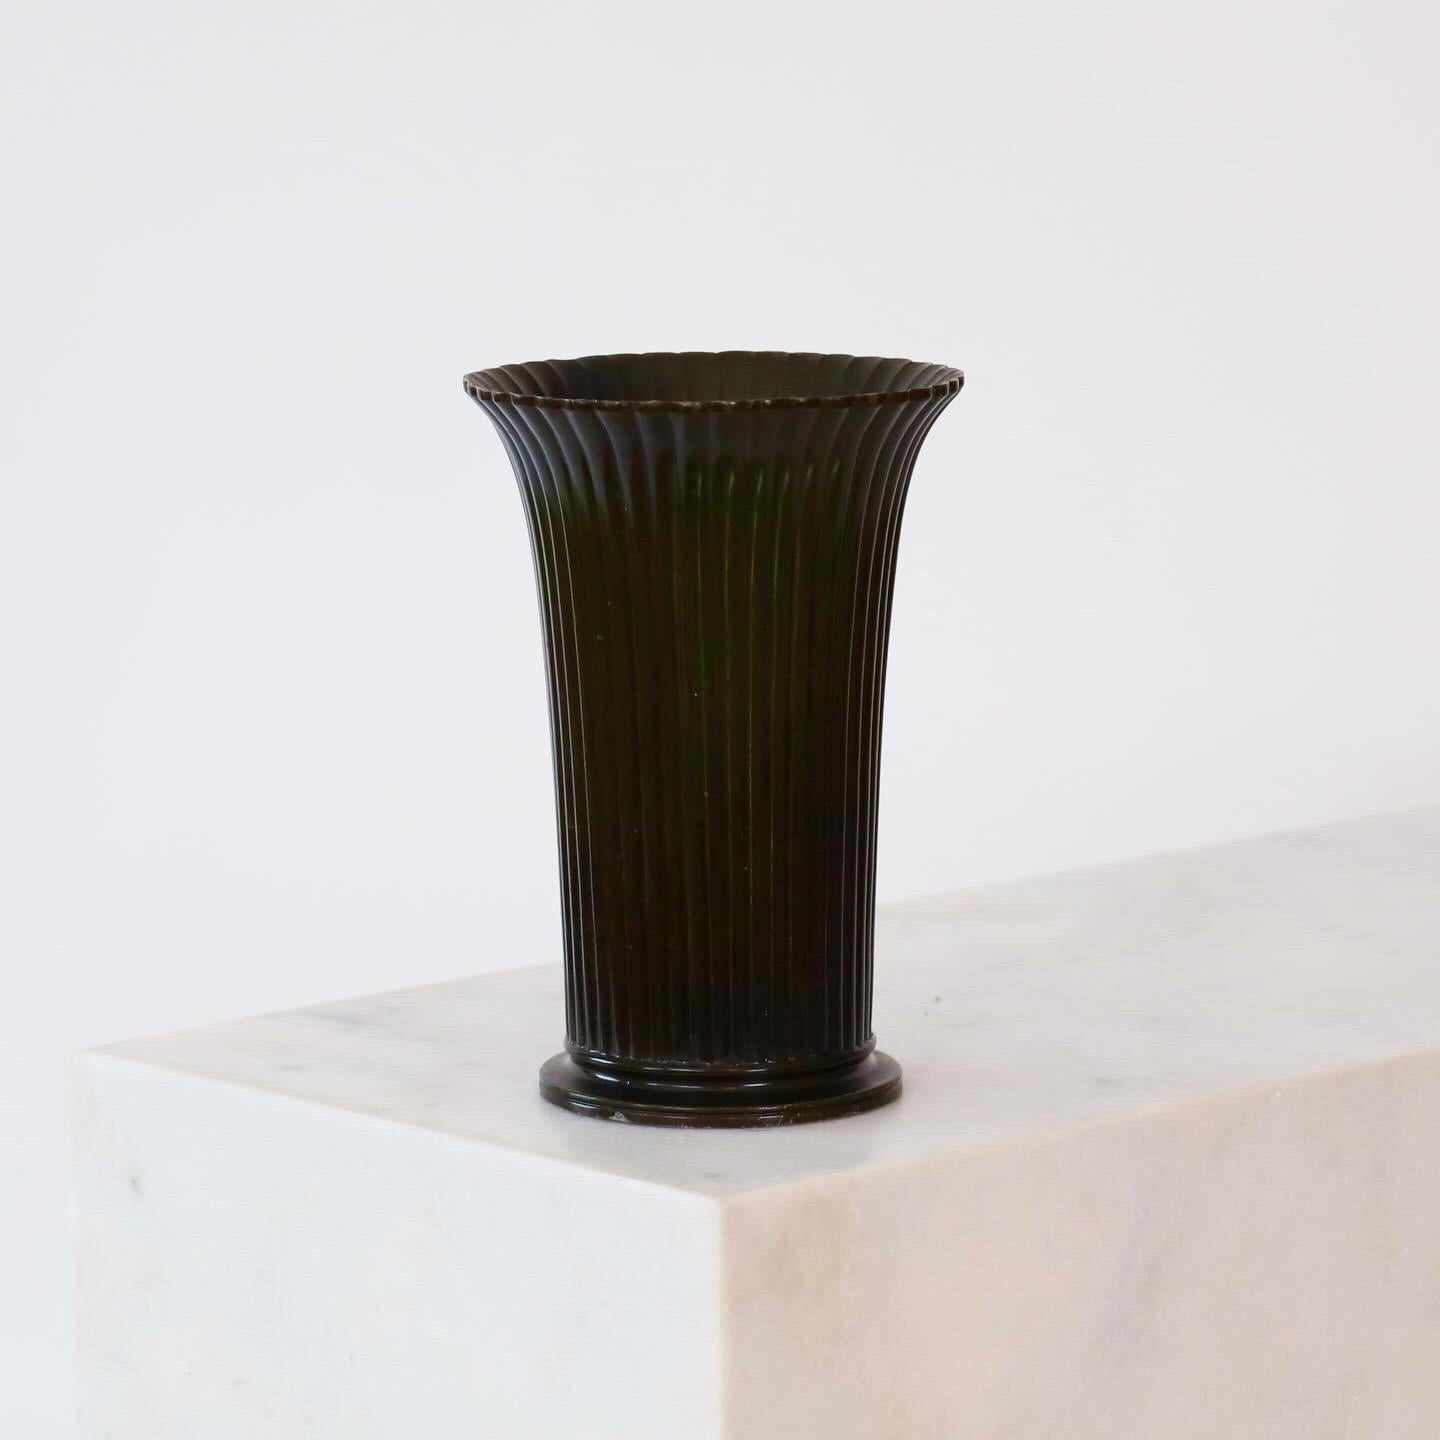 A metal vase with vertical lines designed by Just Andersen in the 1942. An eye-cathing piece in great condition.

* A round metal vase with vertical lines
* Designer: Just Andersen
* Model: D2318
* Year: 1942
* Condition: Very good vintage